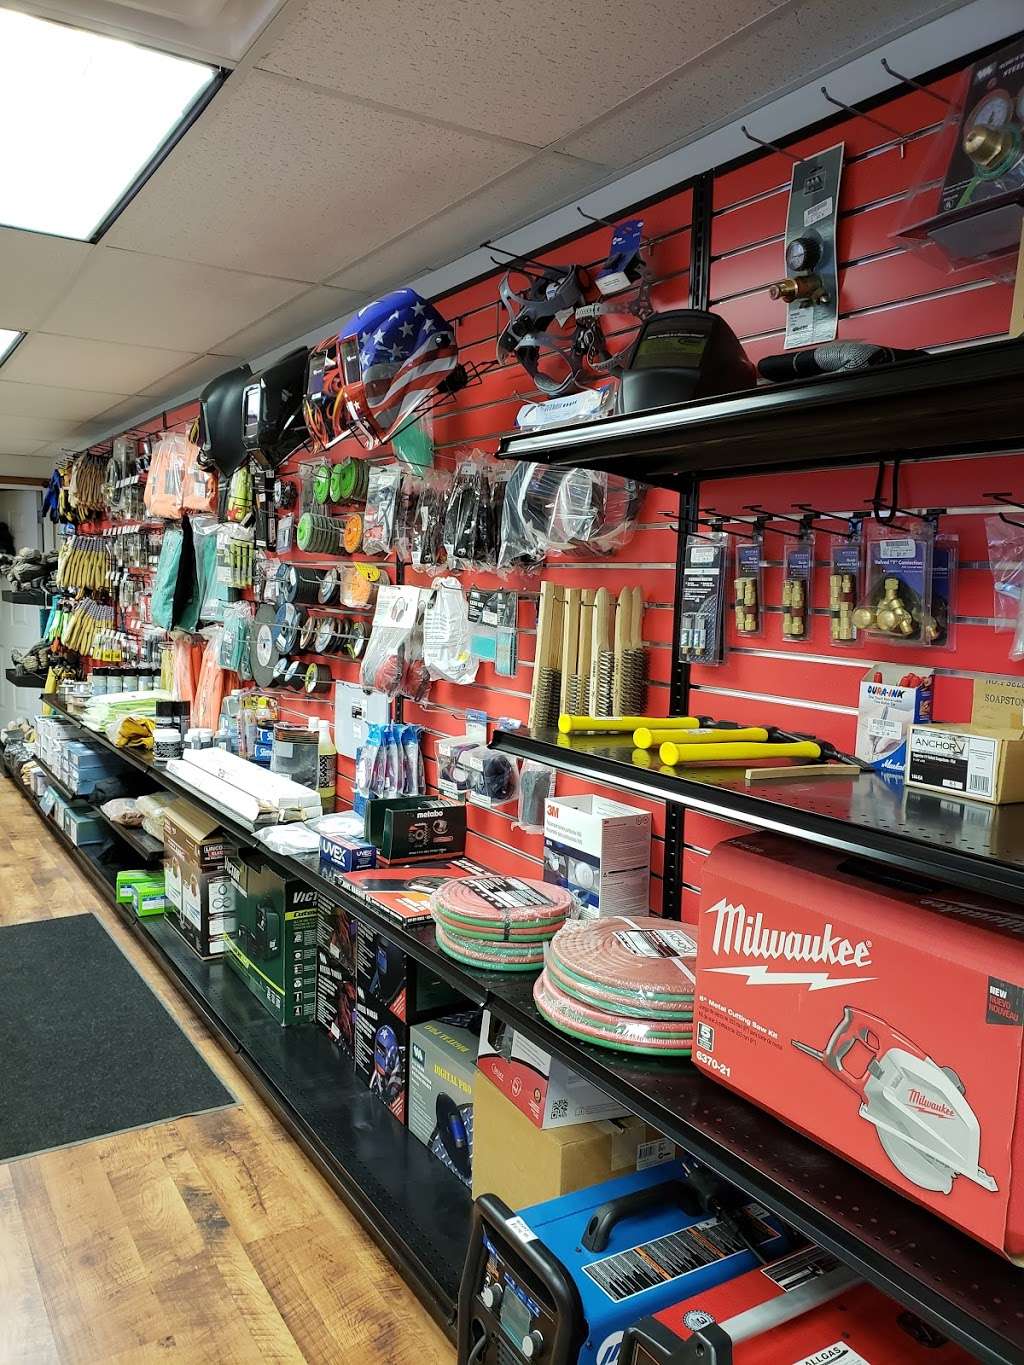 All Gas & Welding Supply Co | 1483 PA-739 #2, Dingmans Ferry, PA 18328, USA | Phone: (570) 828-1700